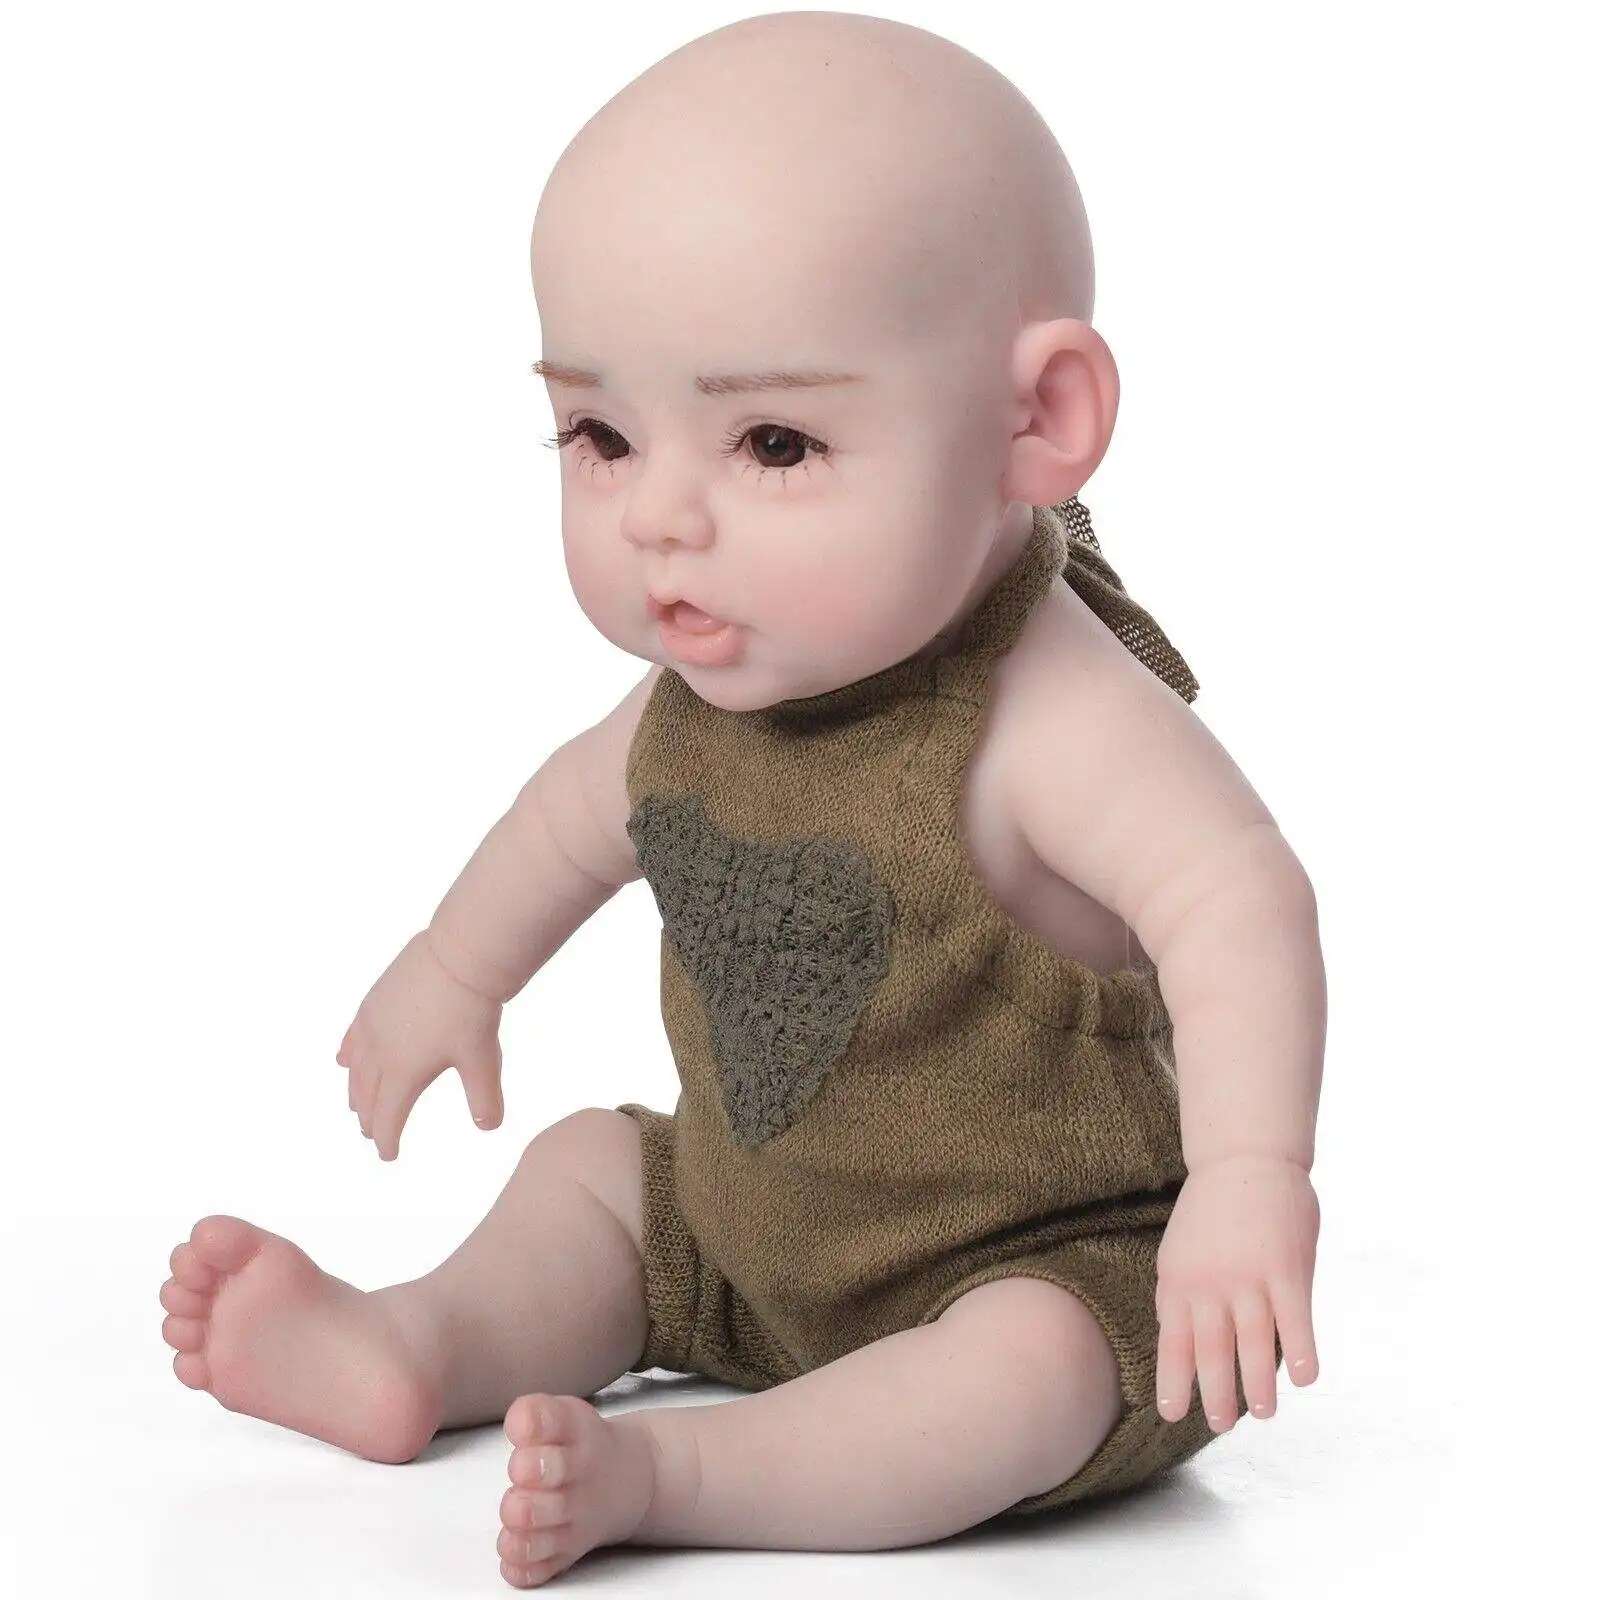 With Moveable Limbs Renborn Baby Boy 17.7" Silicone Baby Doll Platinum Full Silicone Baby Doll For Reborn Collector